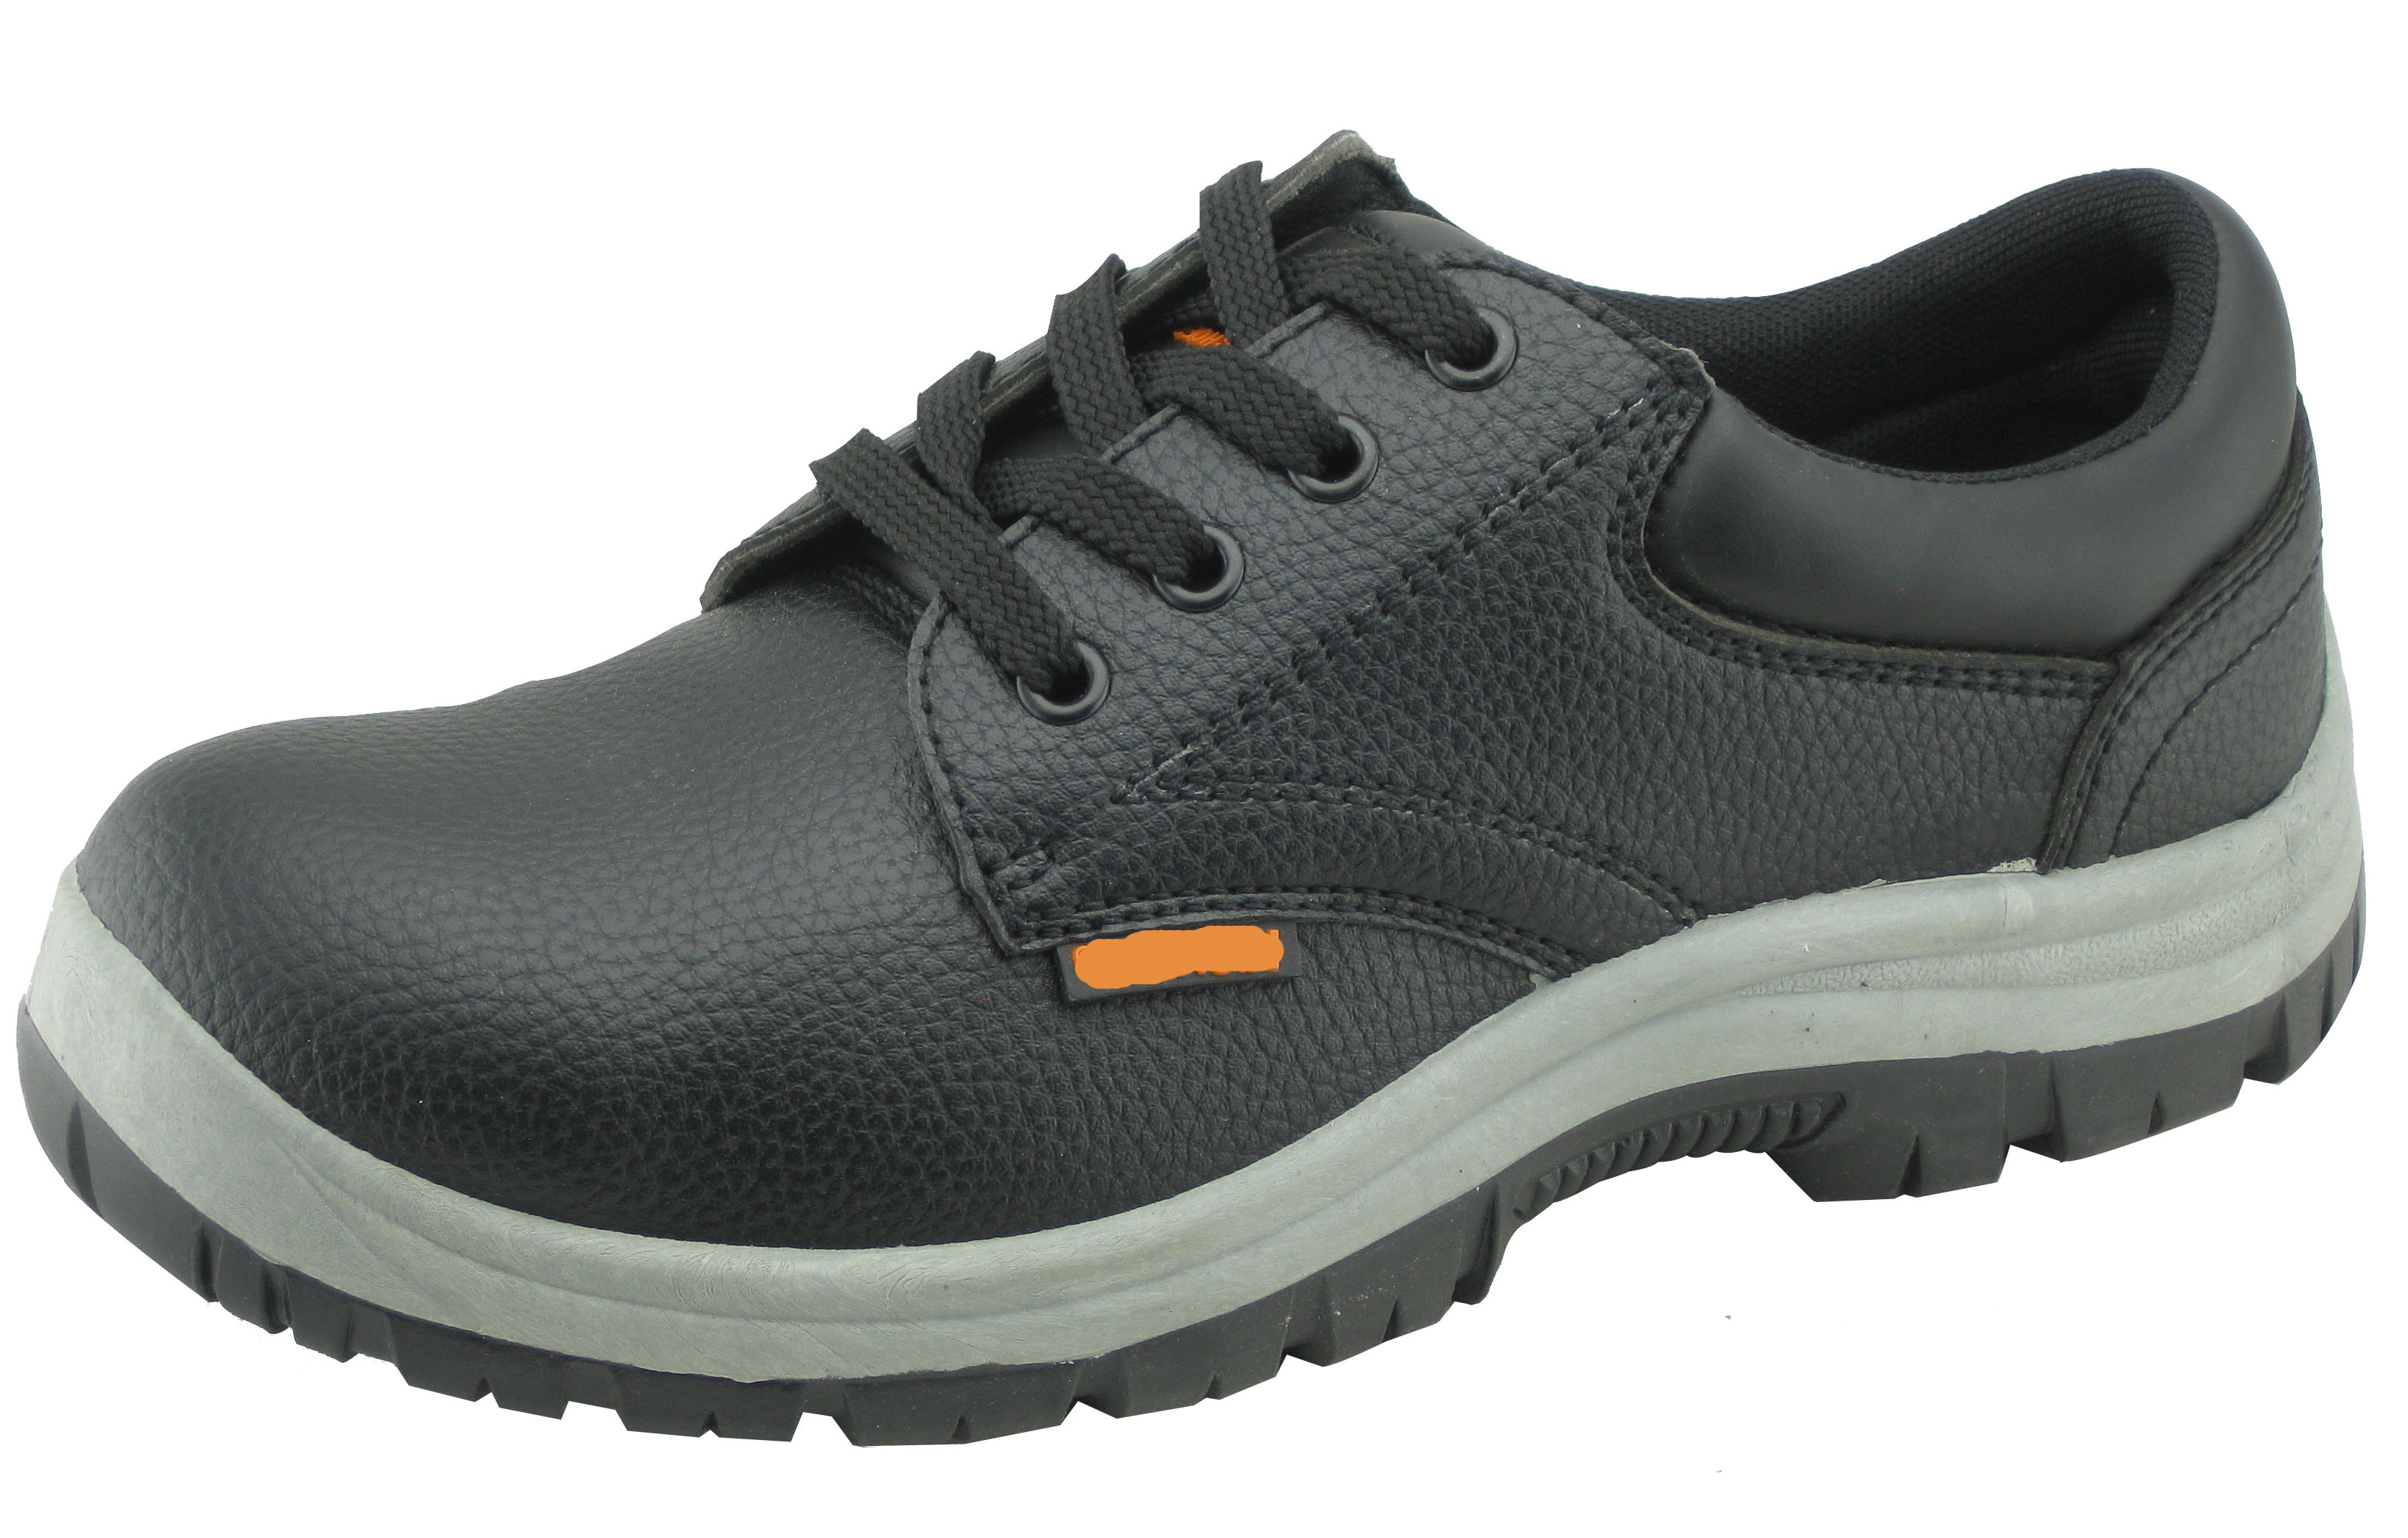 Low cut embossed PU artificial leather industrial safety shoes